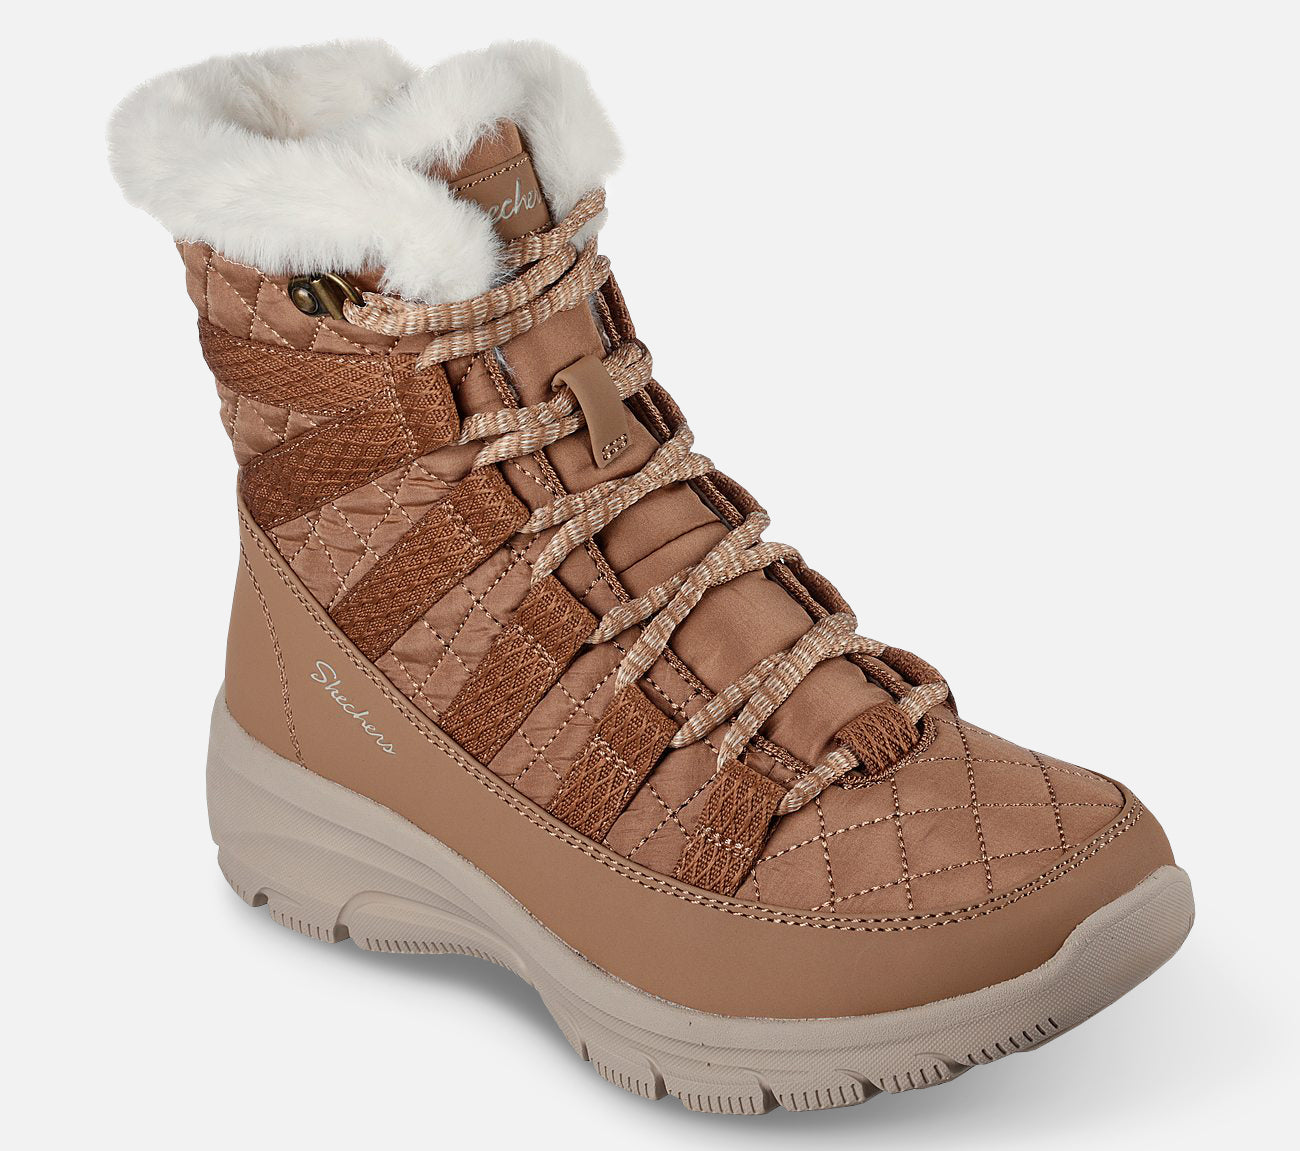 Relaxed Fit Easy Going - Moro Street Boot Skechers